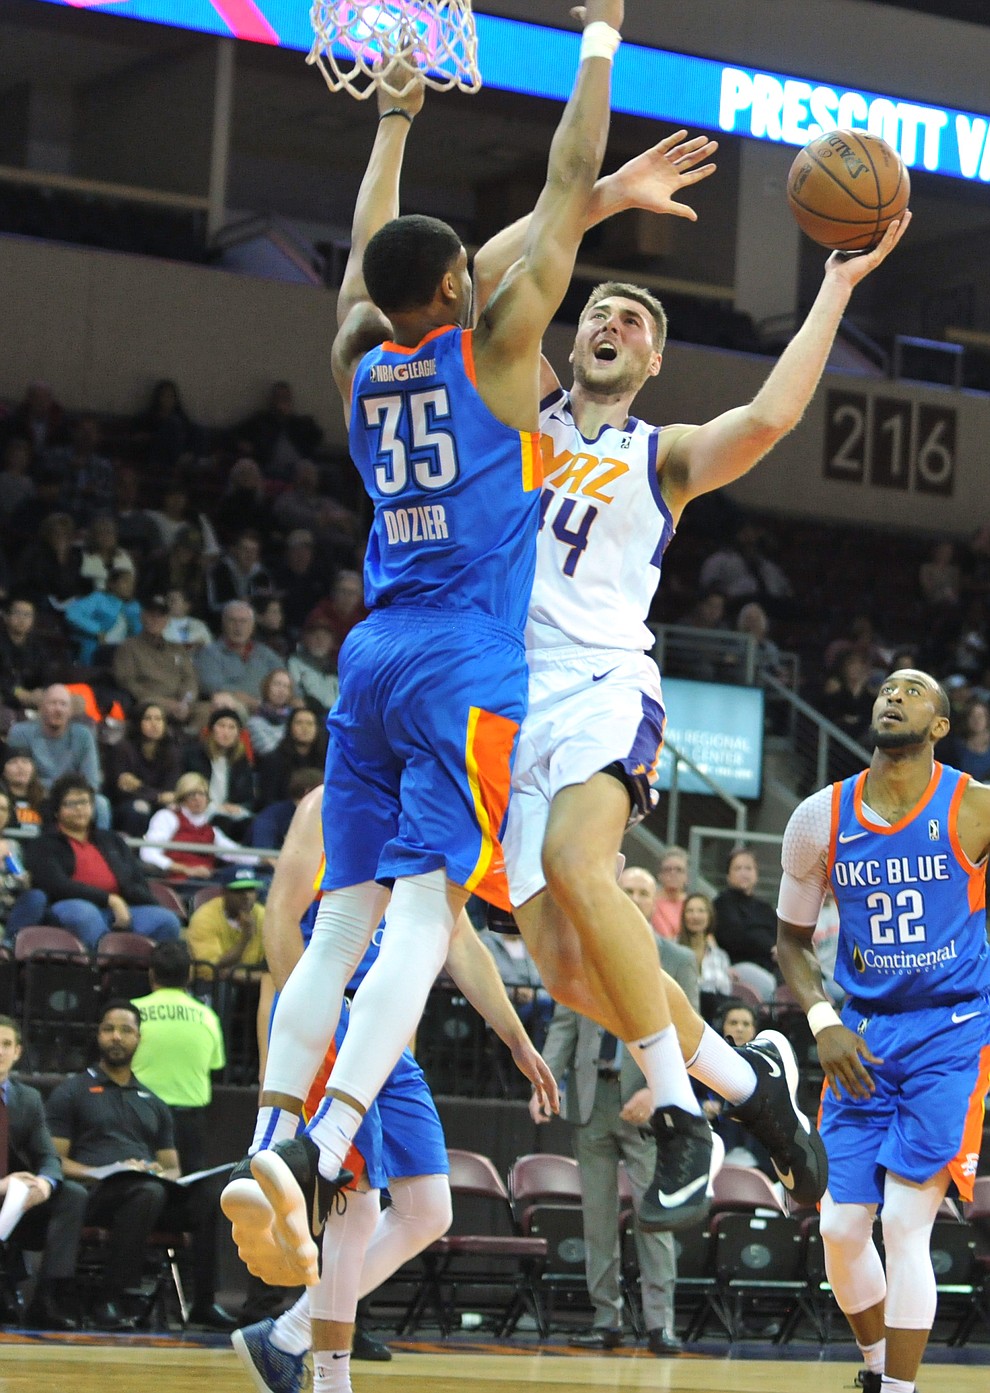 Northern Arizona's Eric Stuteville goes up as the Suns take on the Oklahoma City Blue Friday night at the Prescott Valley Event Center.  (Les Stukenberg/Courier)